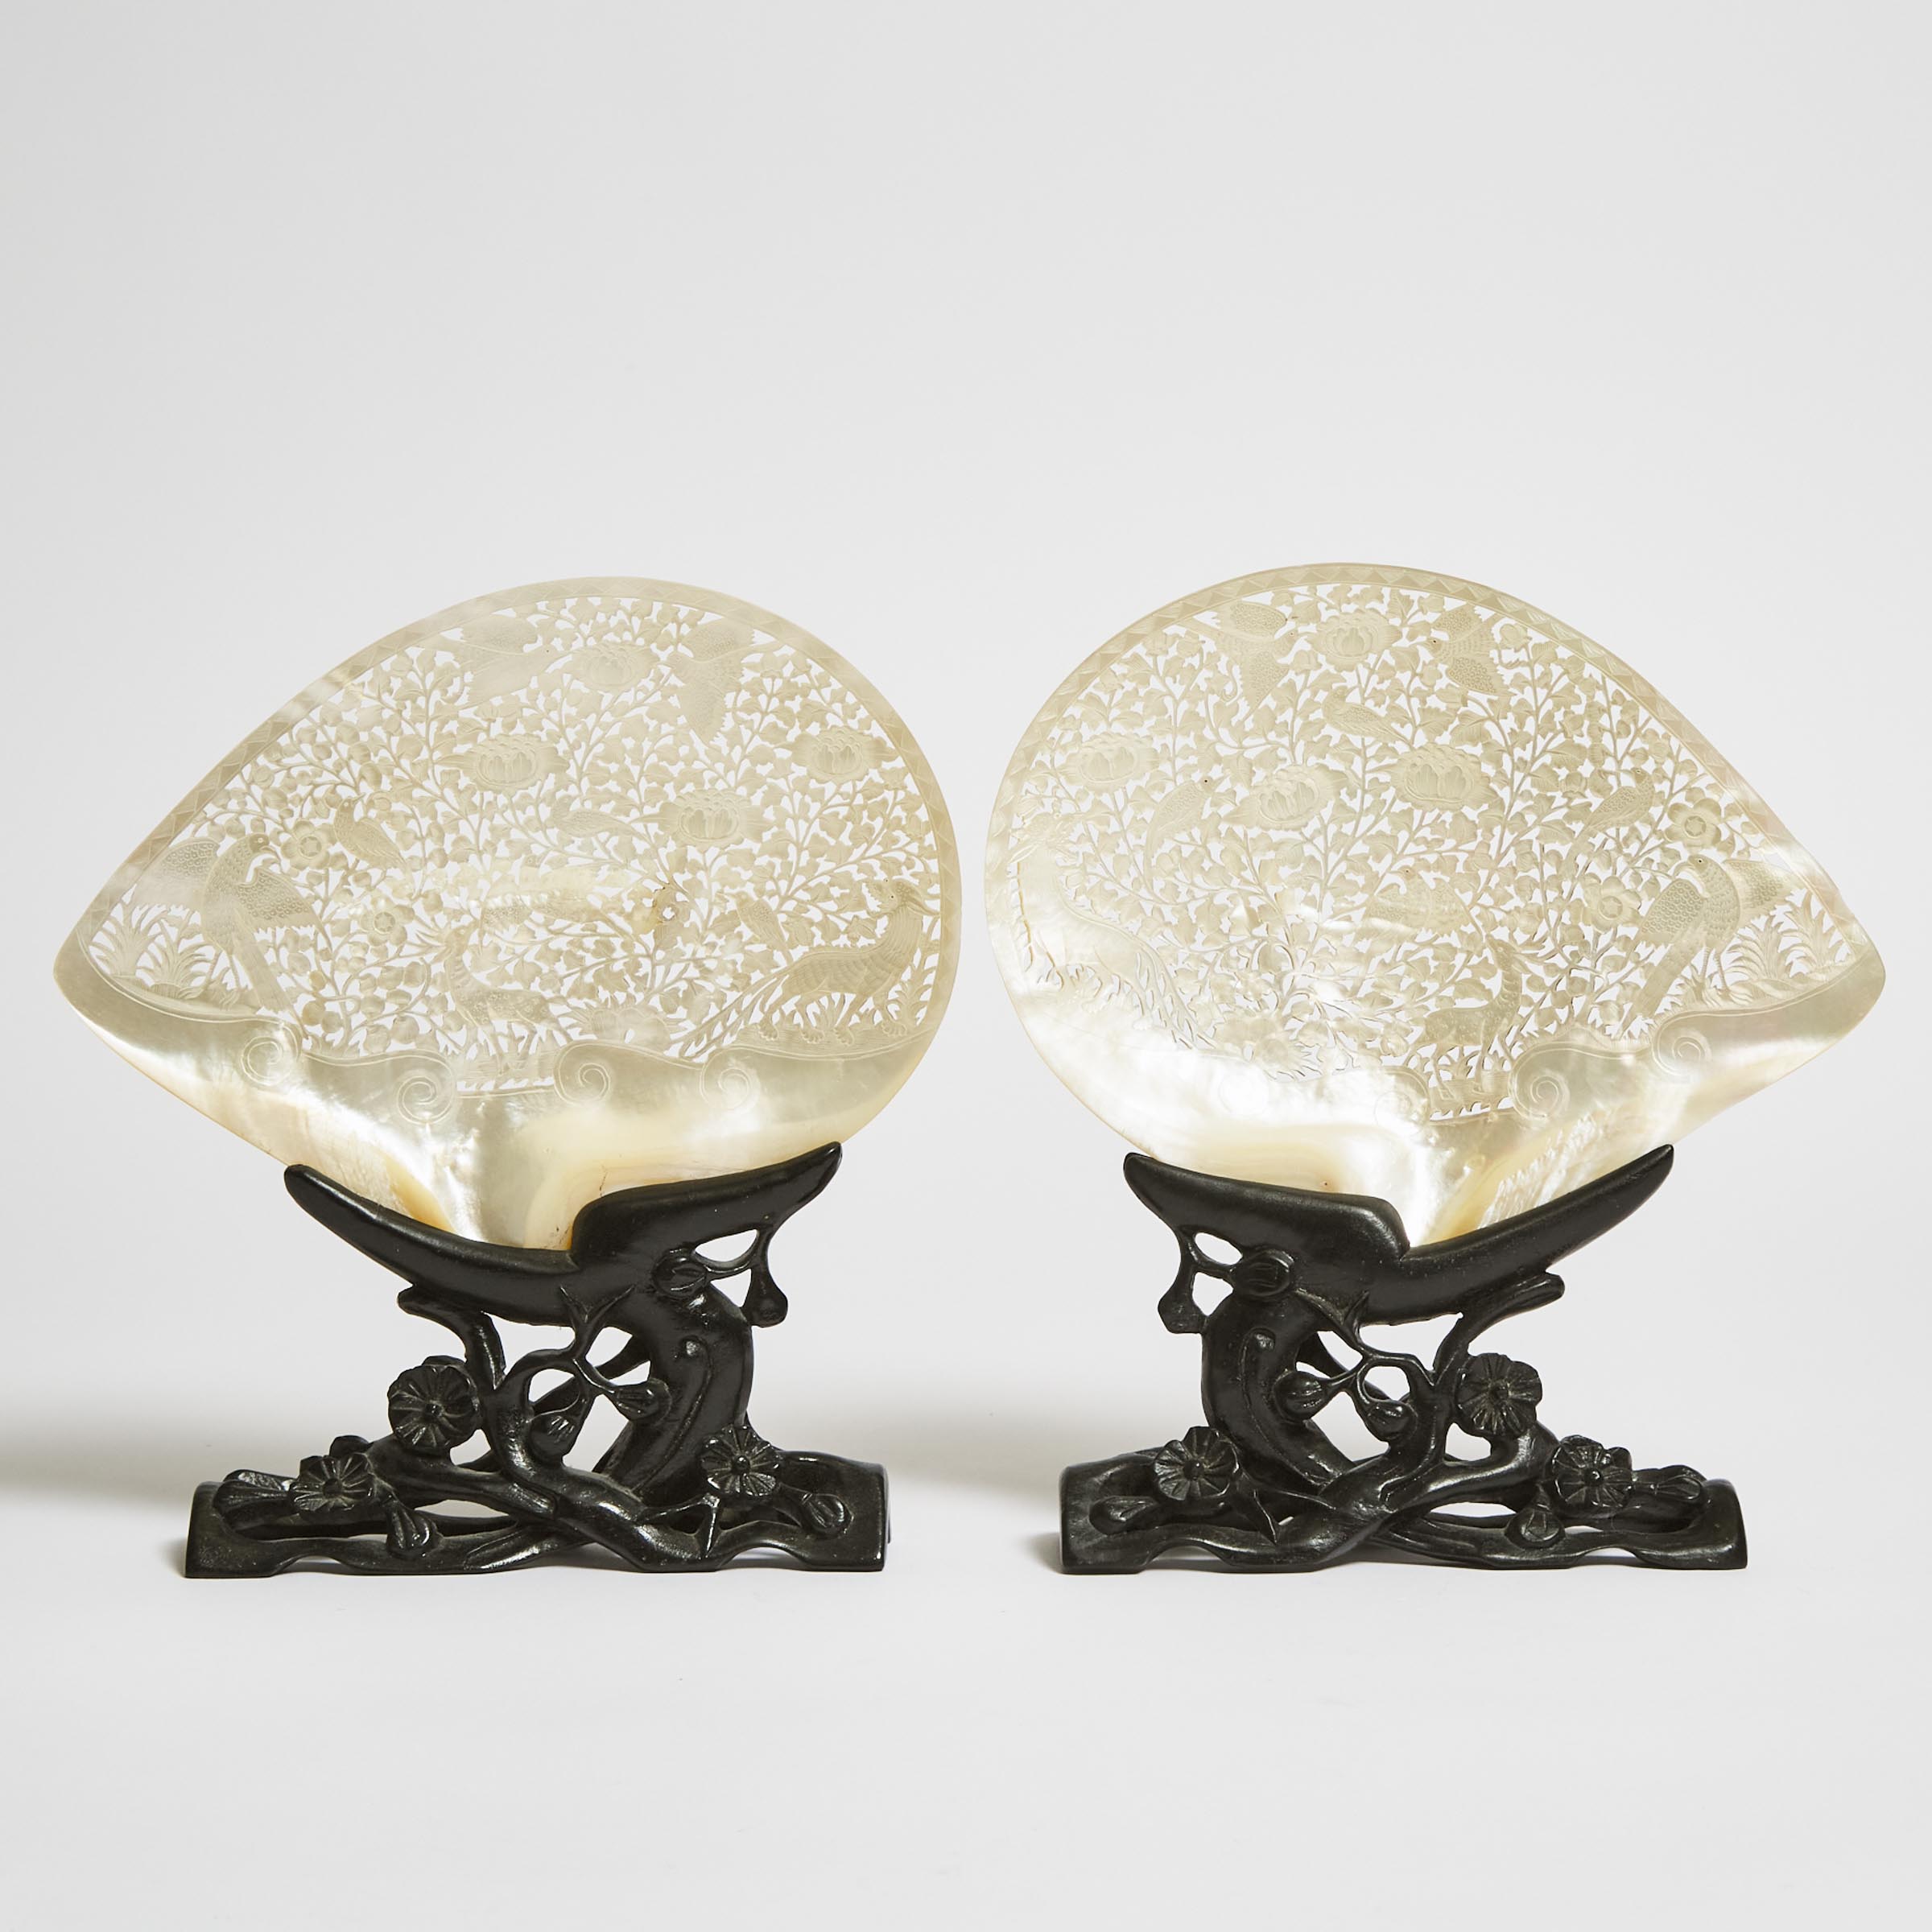 A Pair of Chinese Carved Mother-of-Pearl